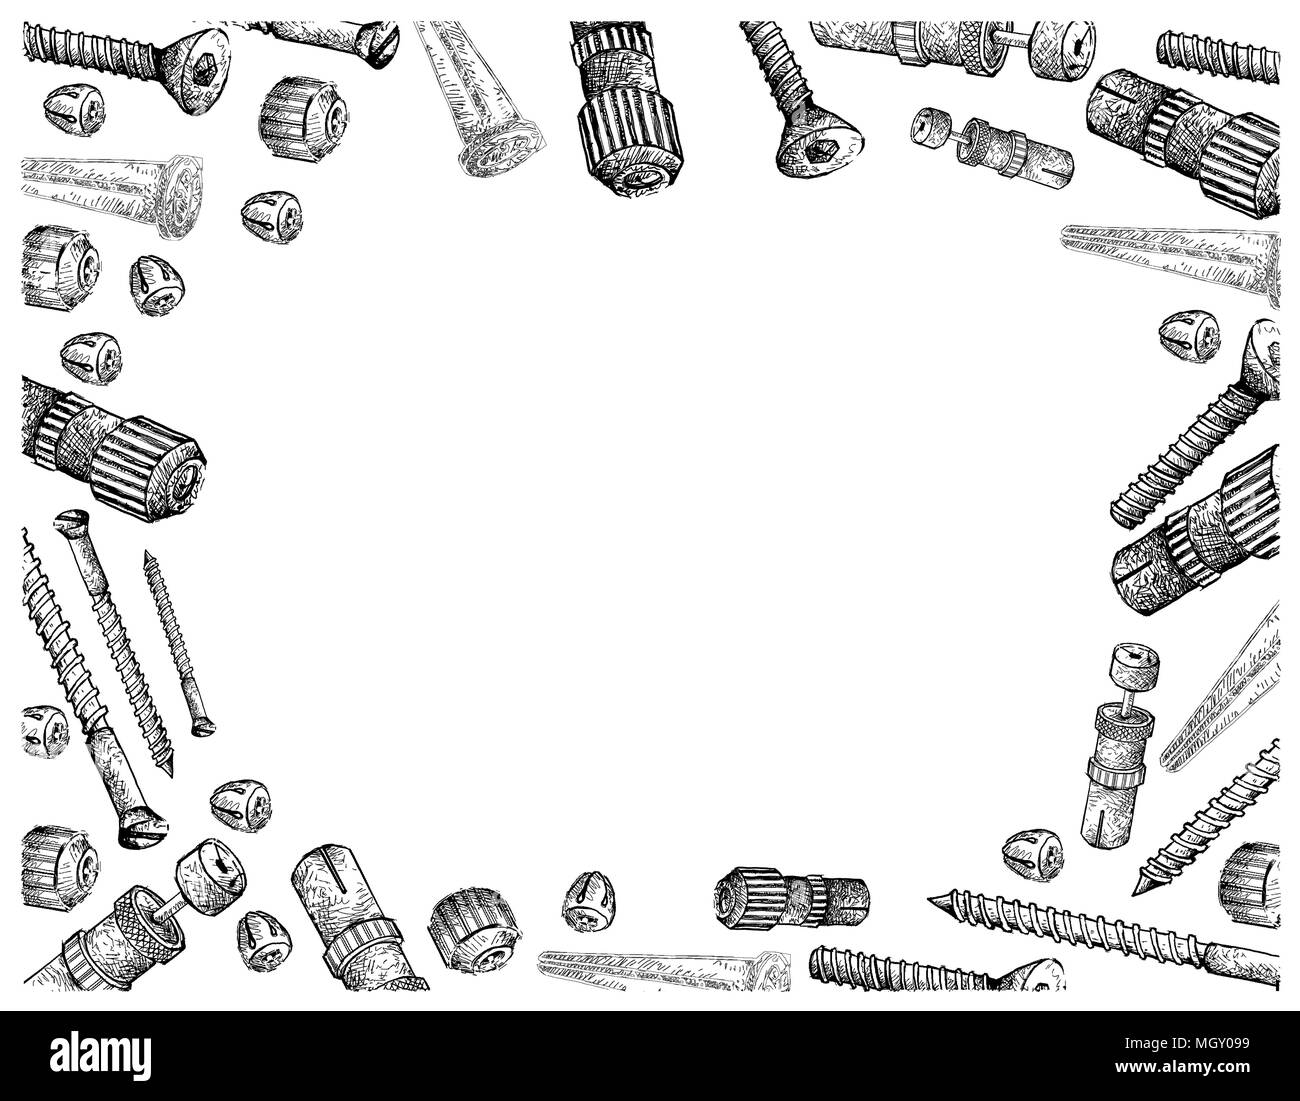 Manufacturing and Industry, Illustration Wallpaper Background of Hand Drawn Sketch of Countersunk Socket Cap Screws TV Aerial Plugs and Sleeve Anchors Stock Photo